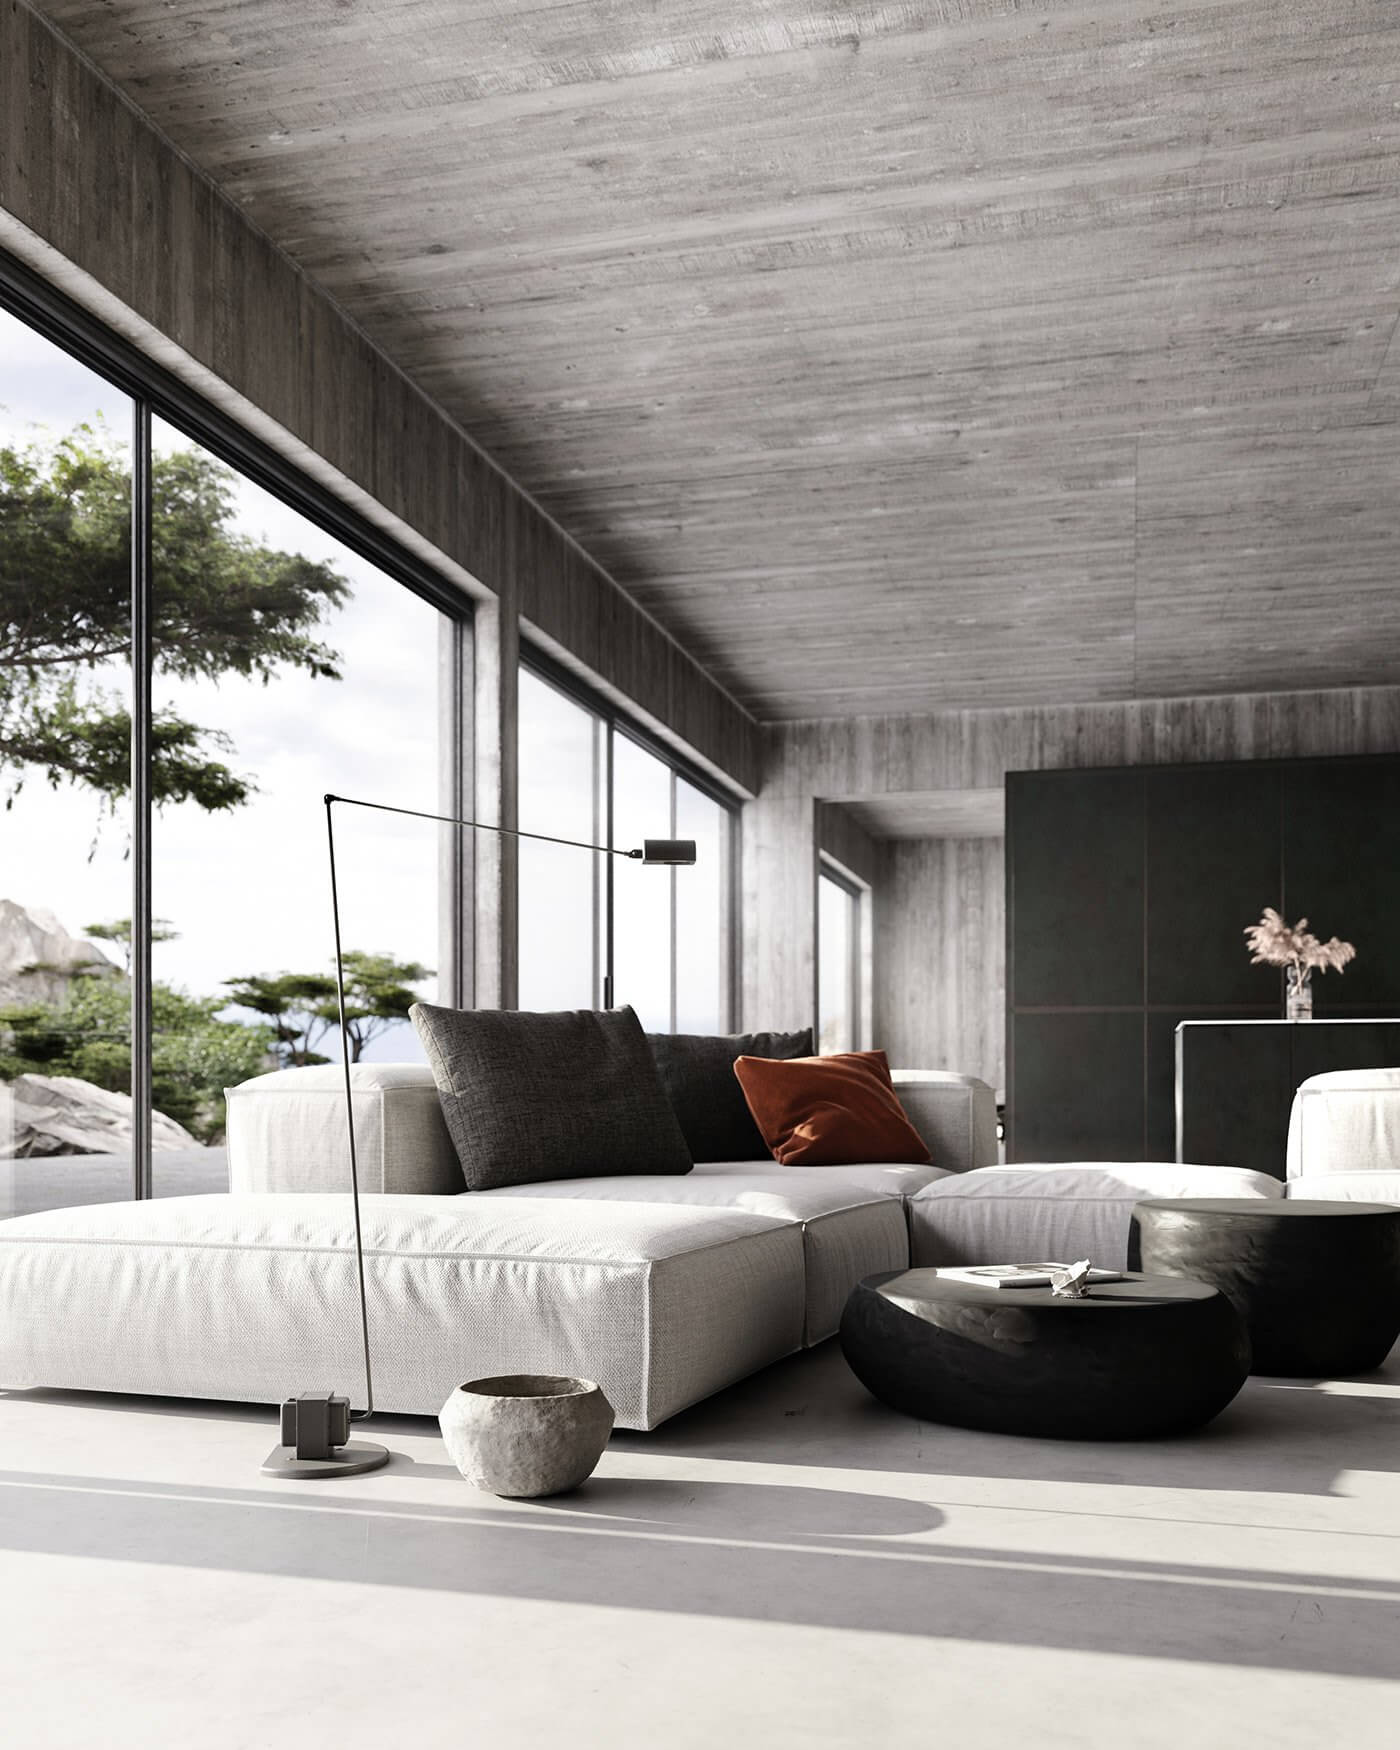 In praise of shadows house living room modern - cgi visualizations